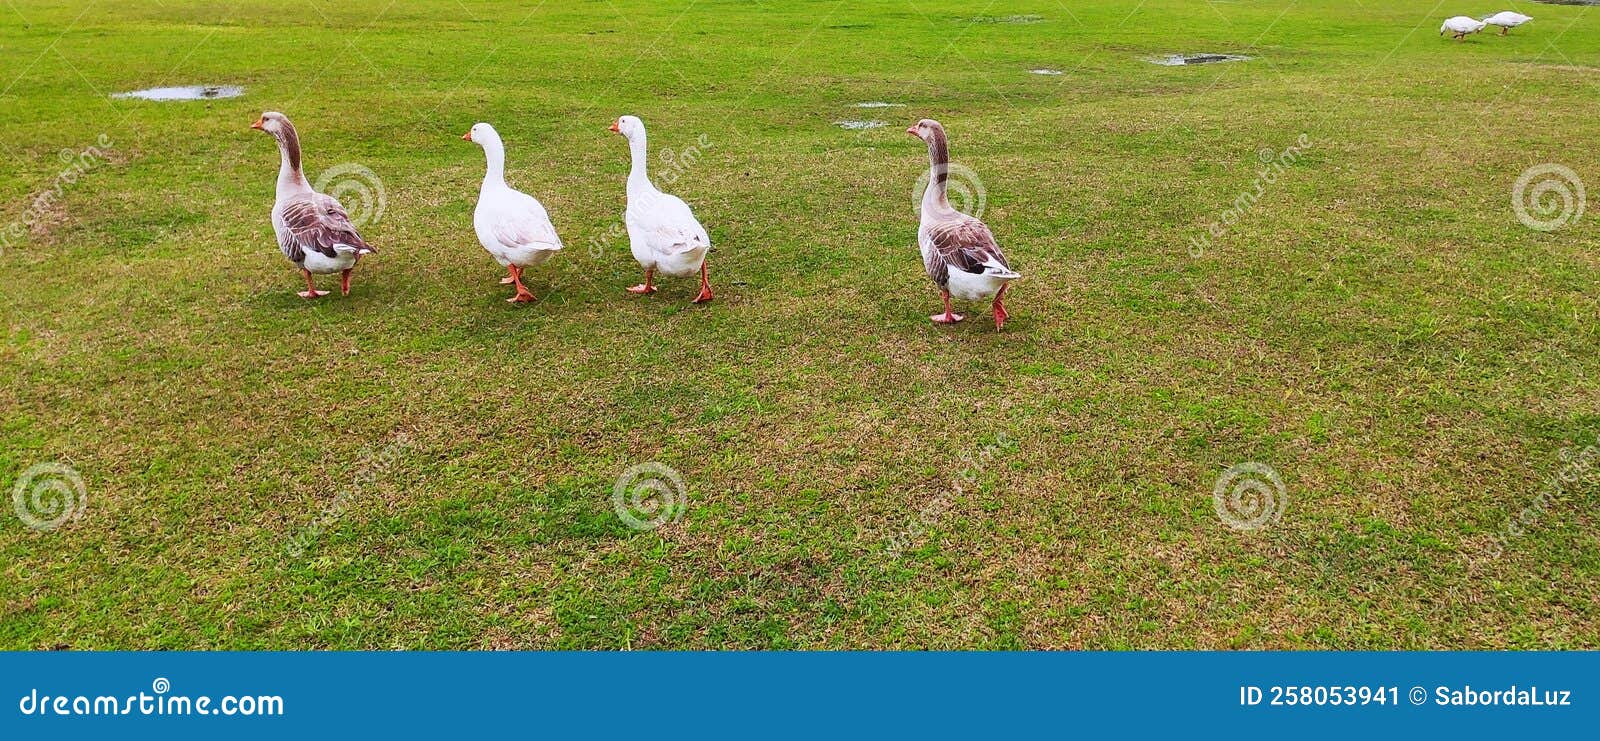 four geese in the flooded fields of parana